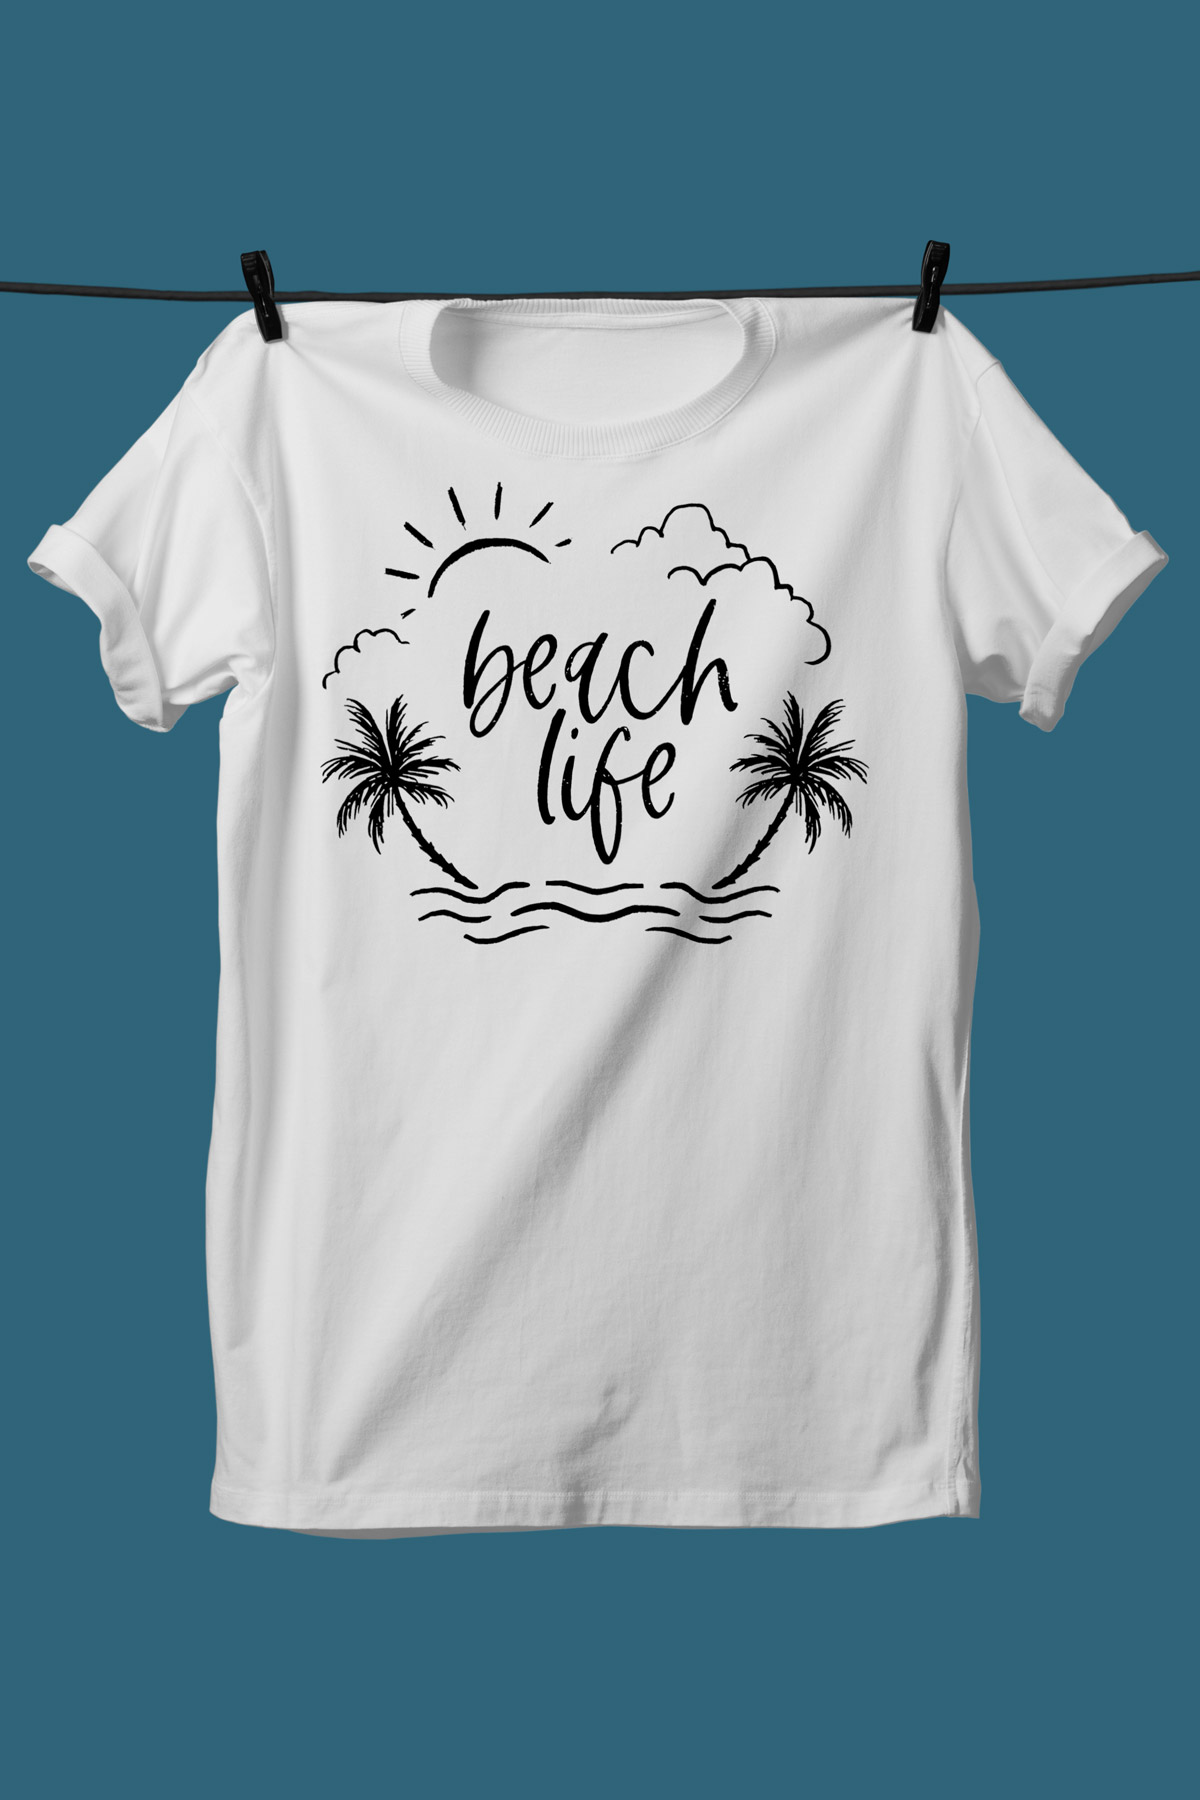 This image shows one of the SVGs from the free summer SVG set on a white tshirt. This one says beach life with the picture of waves, palm trees, clouds, and the sun.